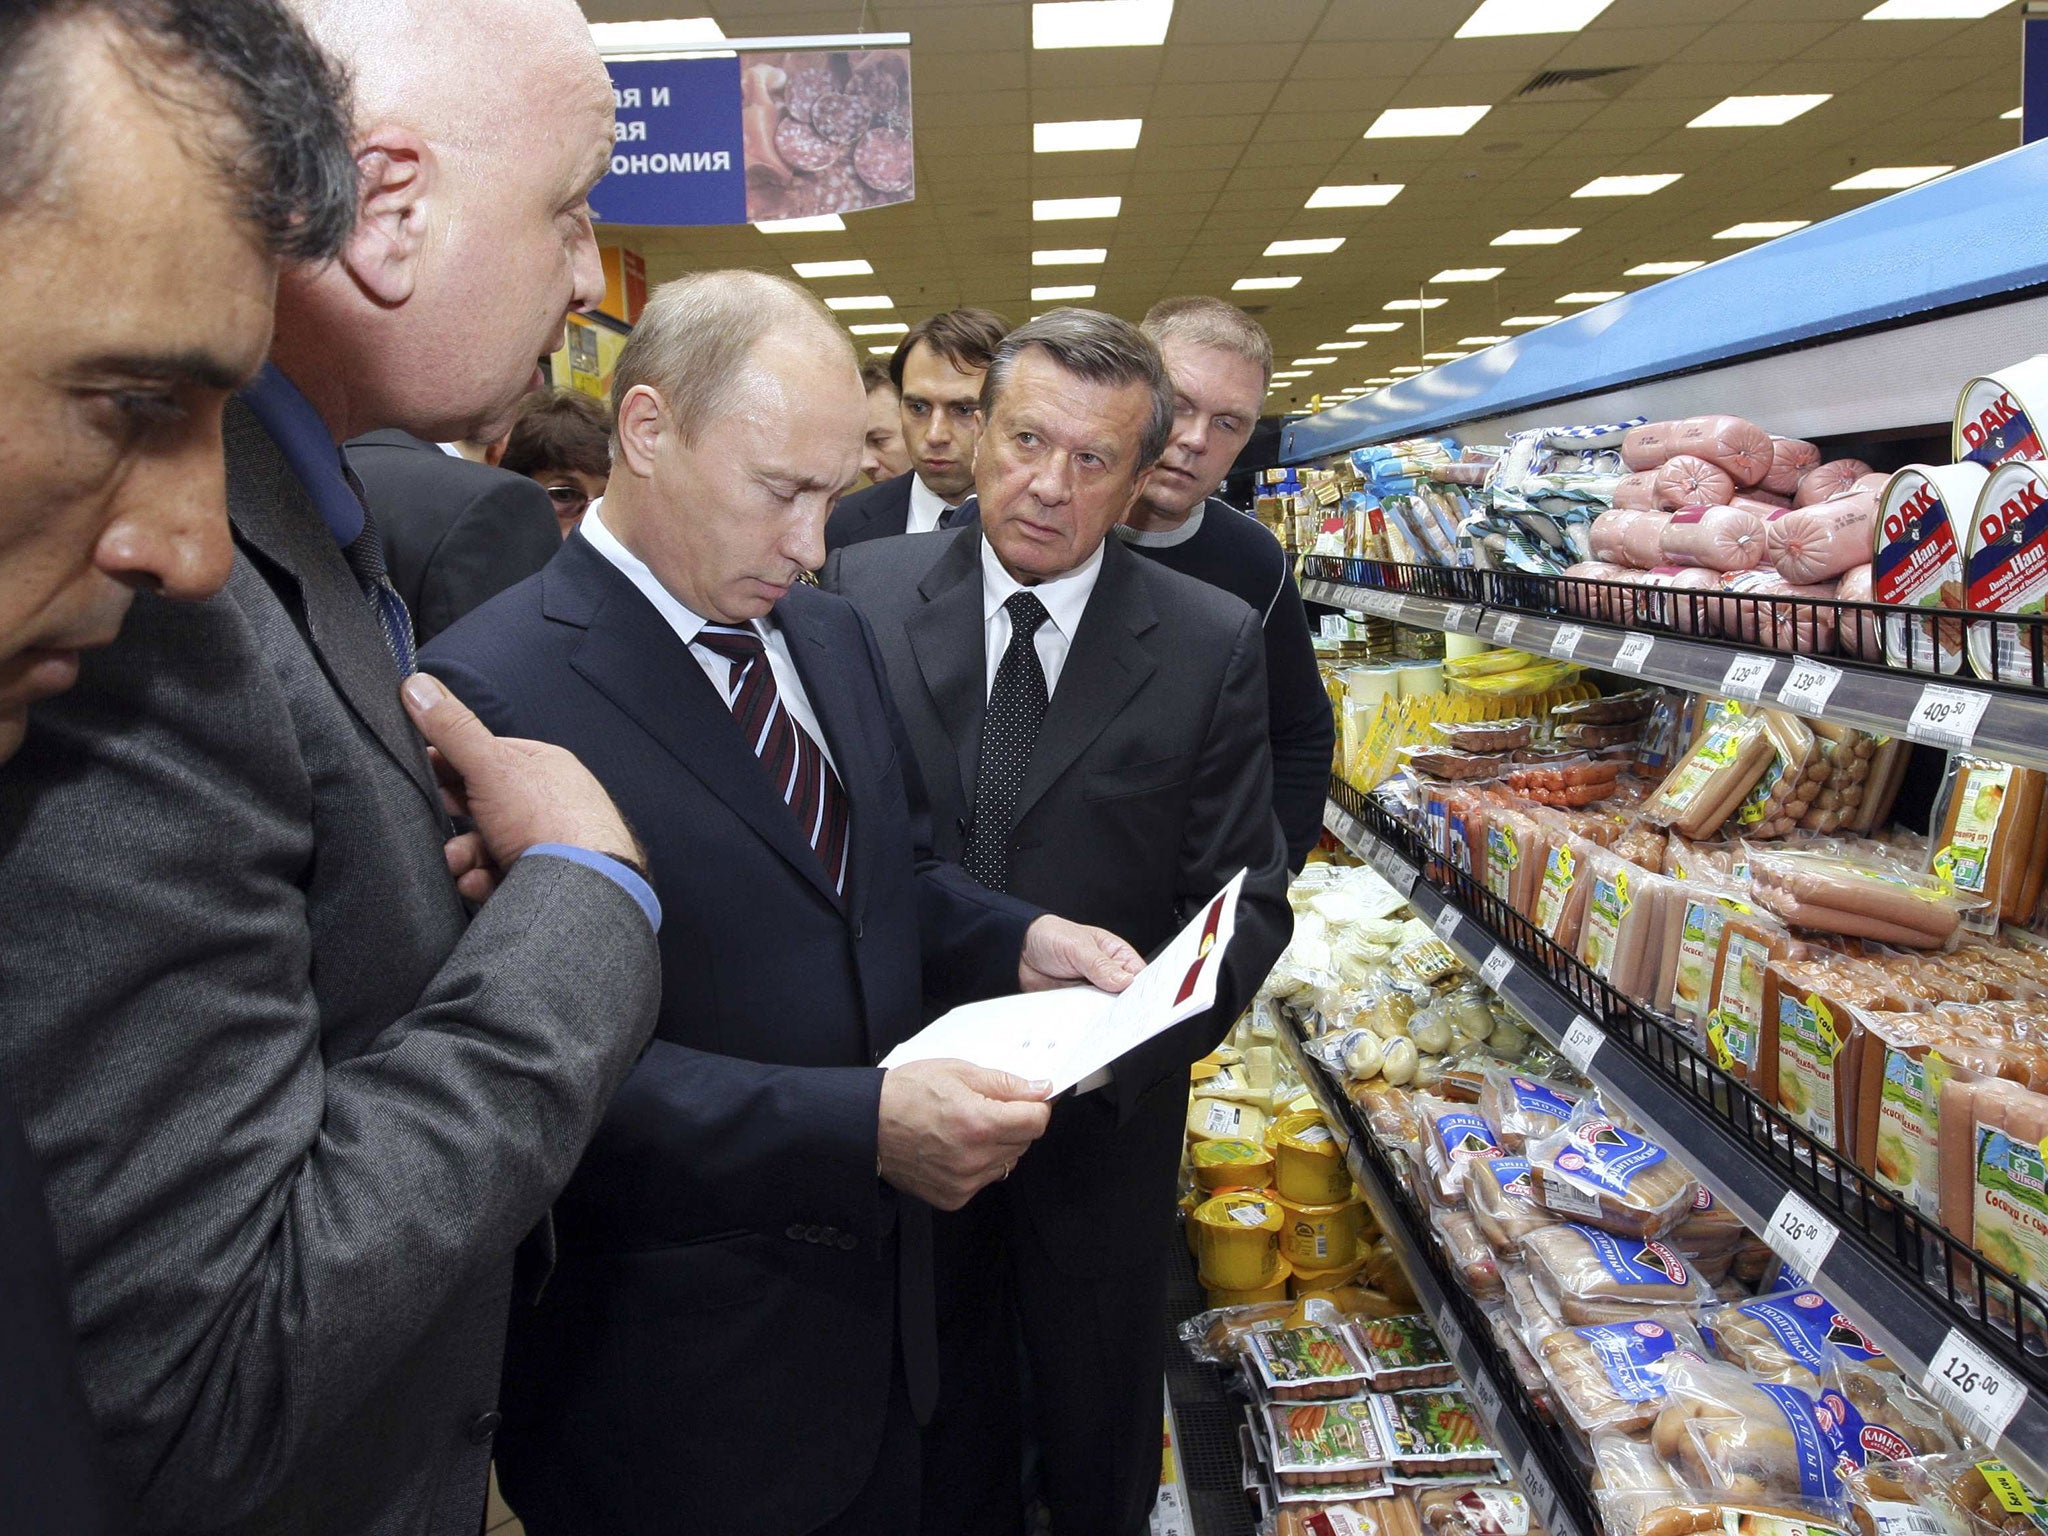 Moscow banned most food imports from the EU and the US on Thursday